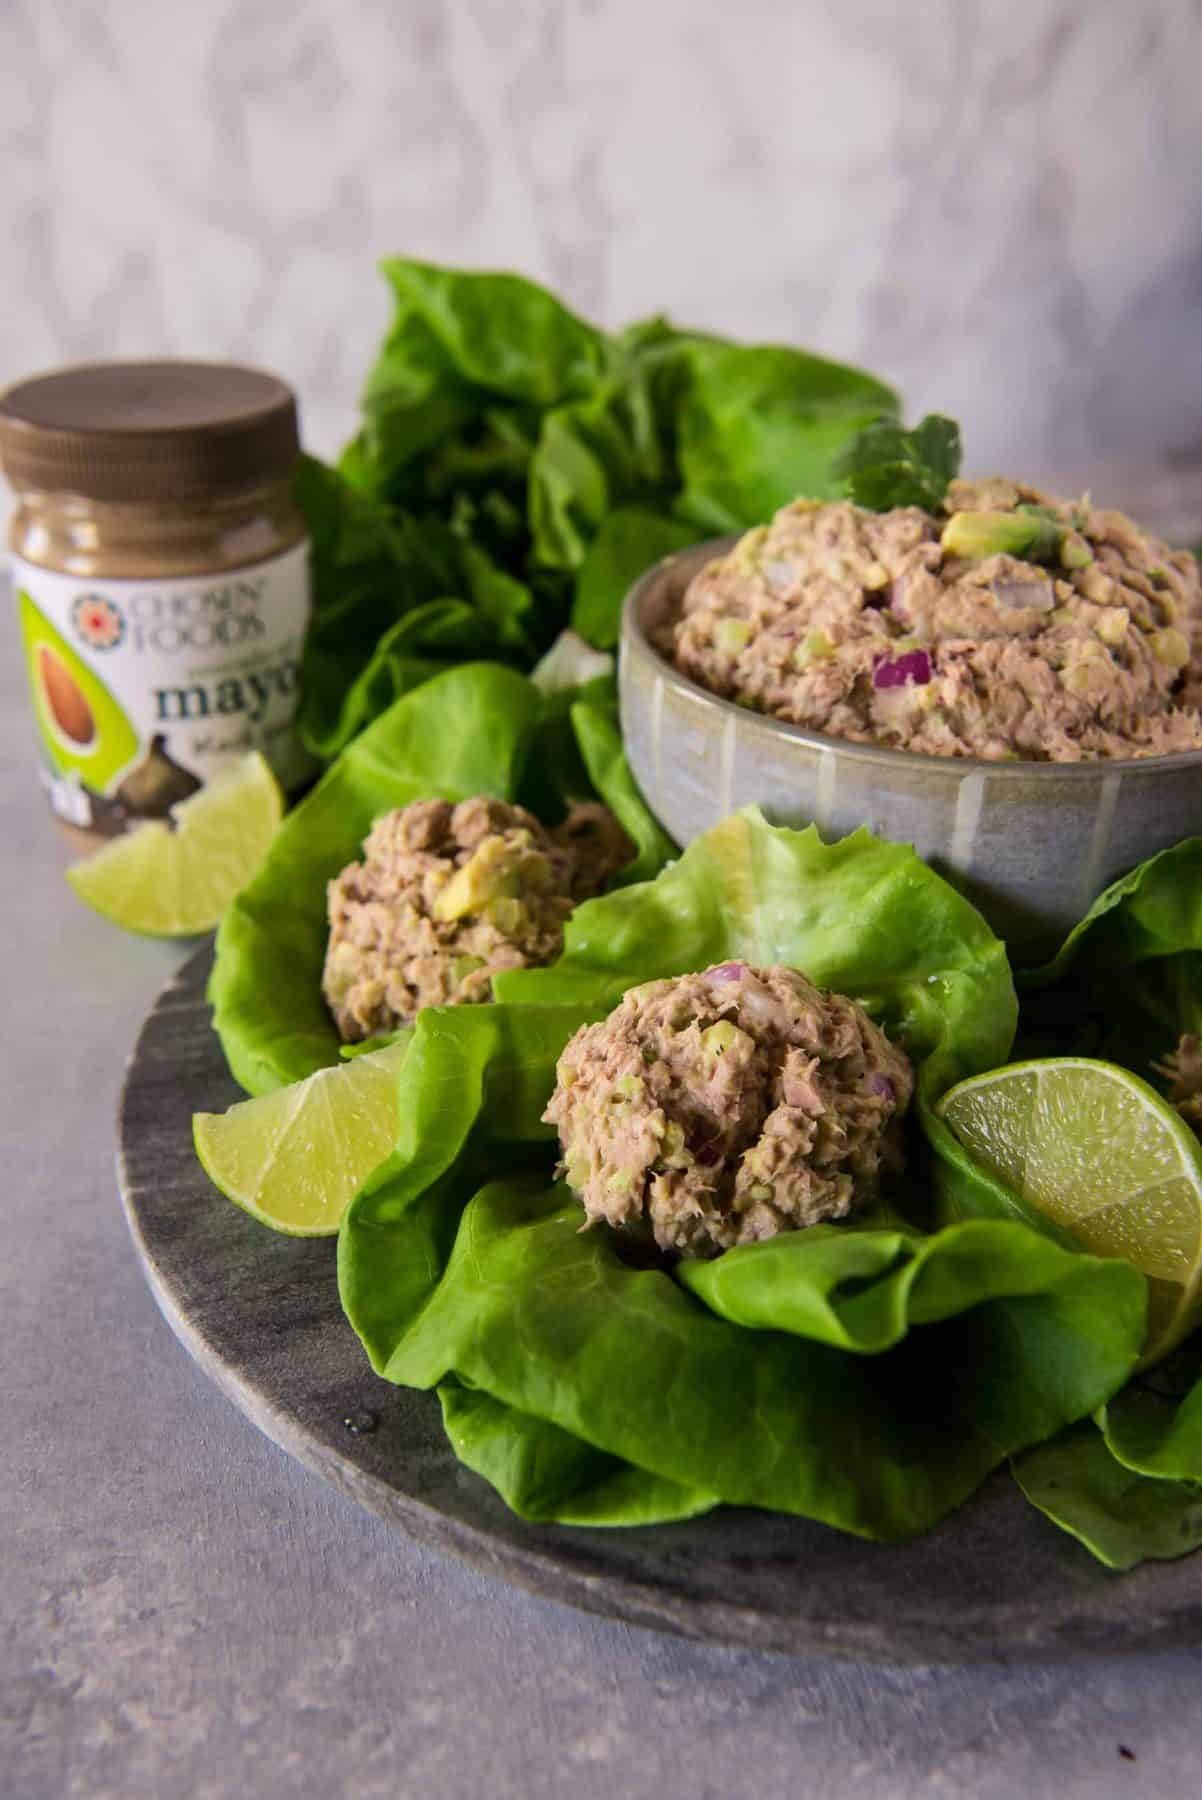 A bowl of avocado tuna salad served on lettuce leaves with lime slices, next to a jar of mayonnaise on a wooden surface.